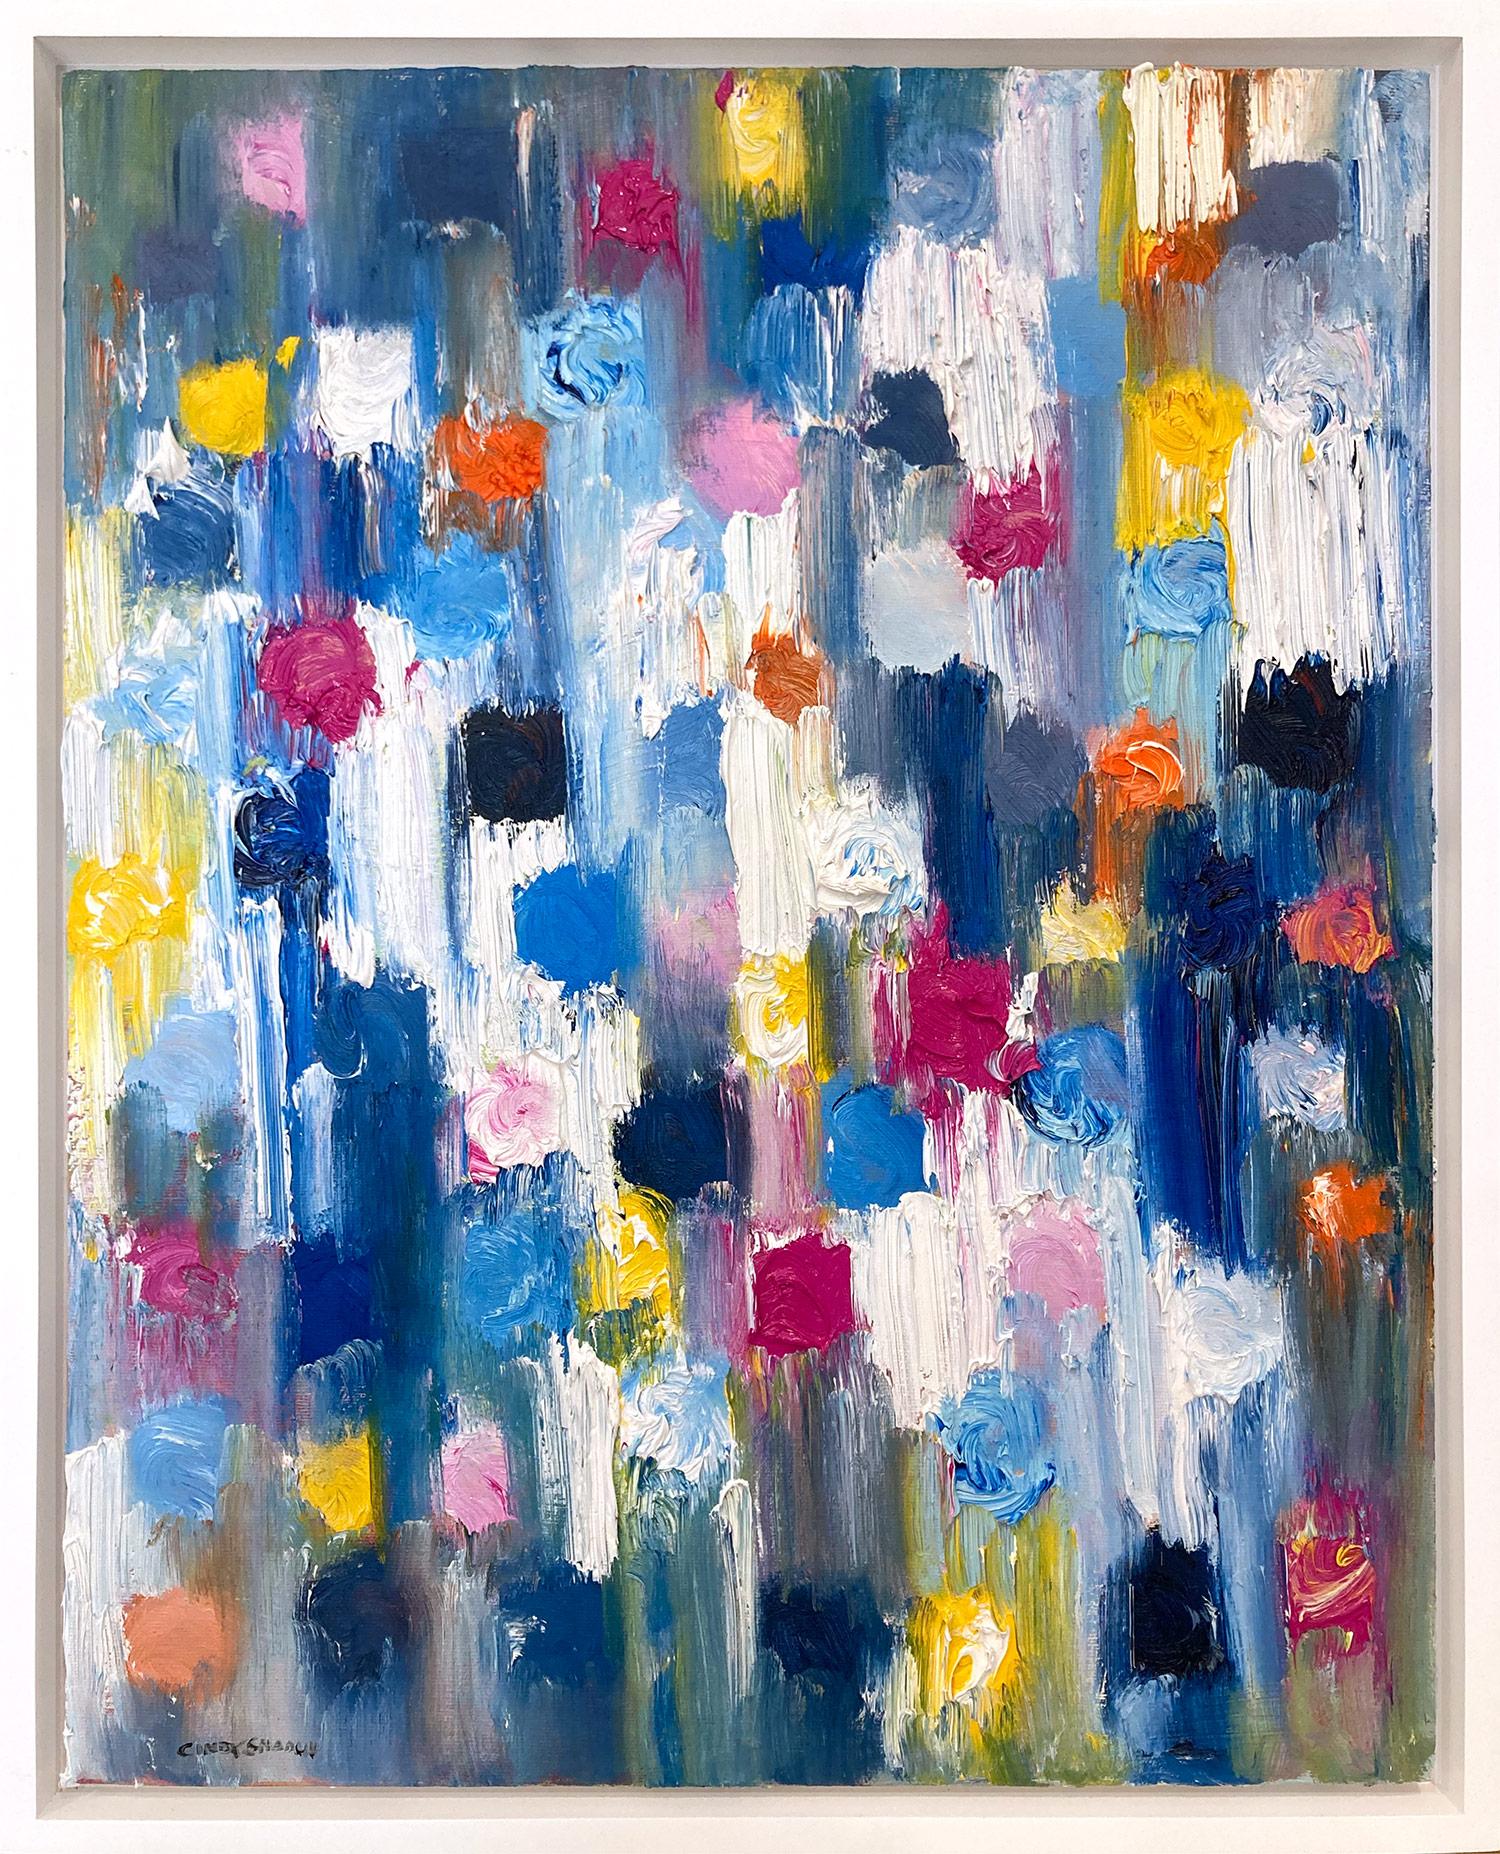 Cindy Shaoul Abstract Painting - "Dripping Dots - Tokyo" Multicolor Contemporary Colorful Oil Painting Canvas